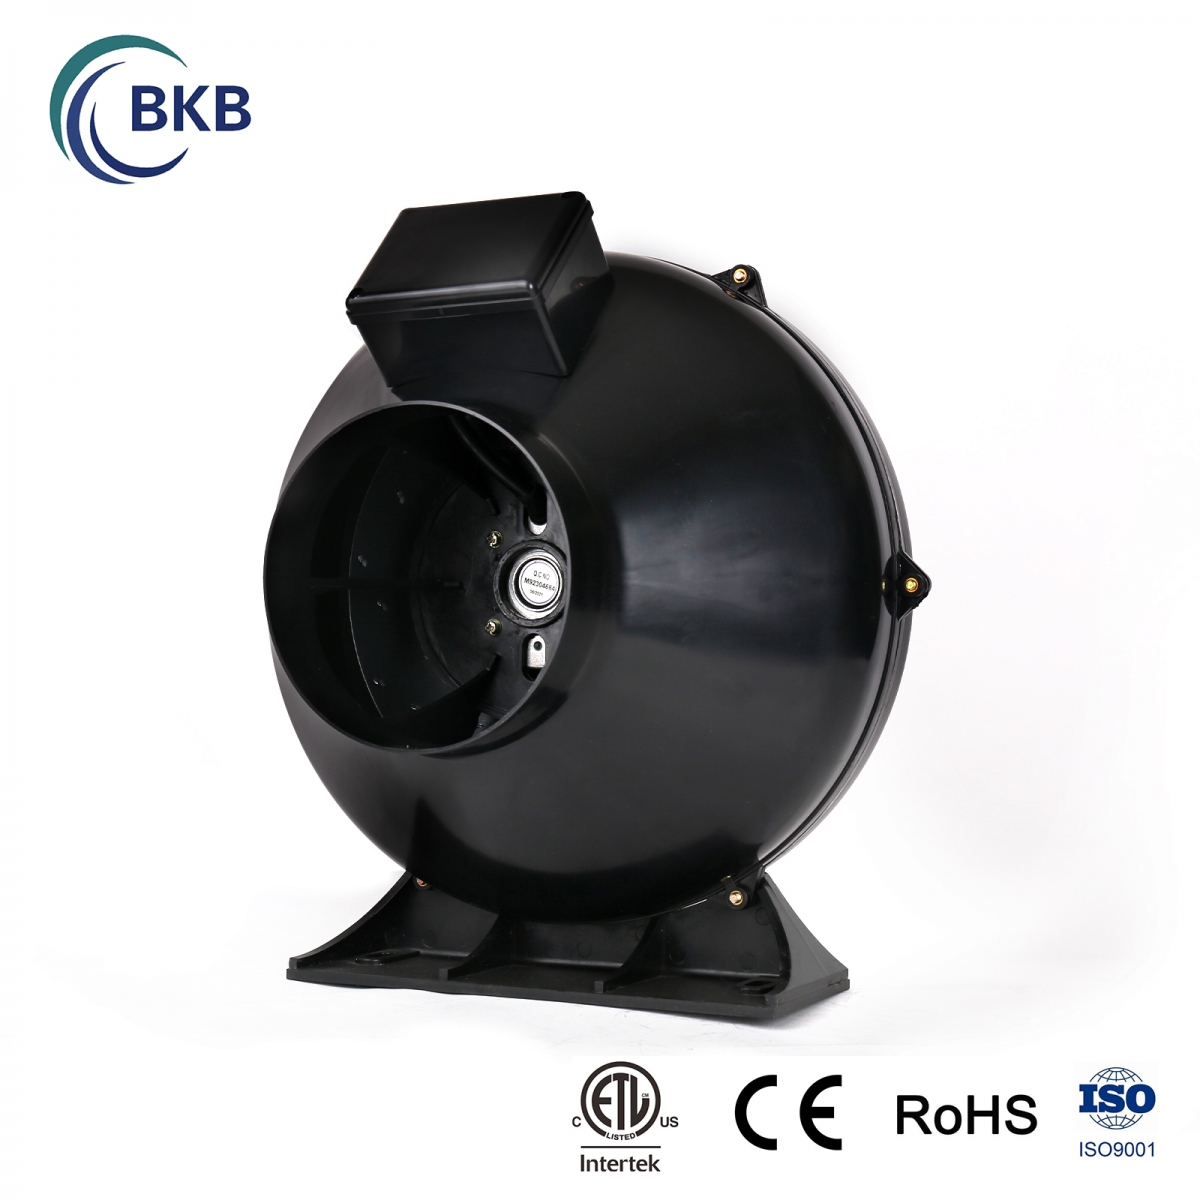 the Asia Pacific region accounted for the largest market share in 2018.-SUNLIGHT BLOWER,Centrifugal Fans, Inline Fans,Motors,Backward curved centrifugal fans ,Forward curved centrifugal fans ,inlet fans, EC fans